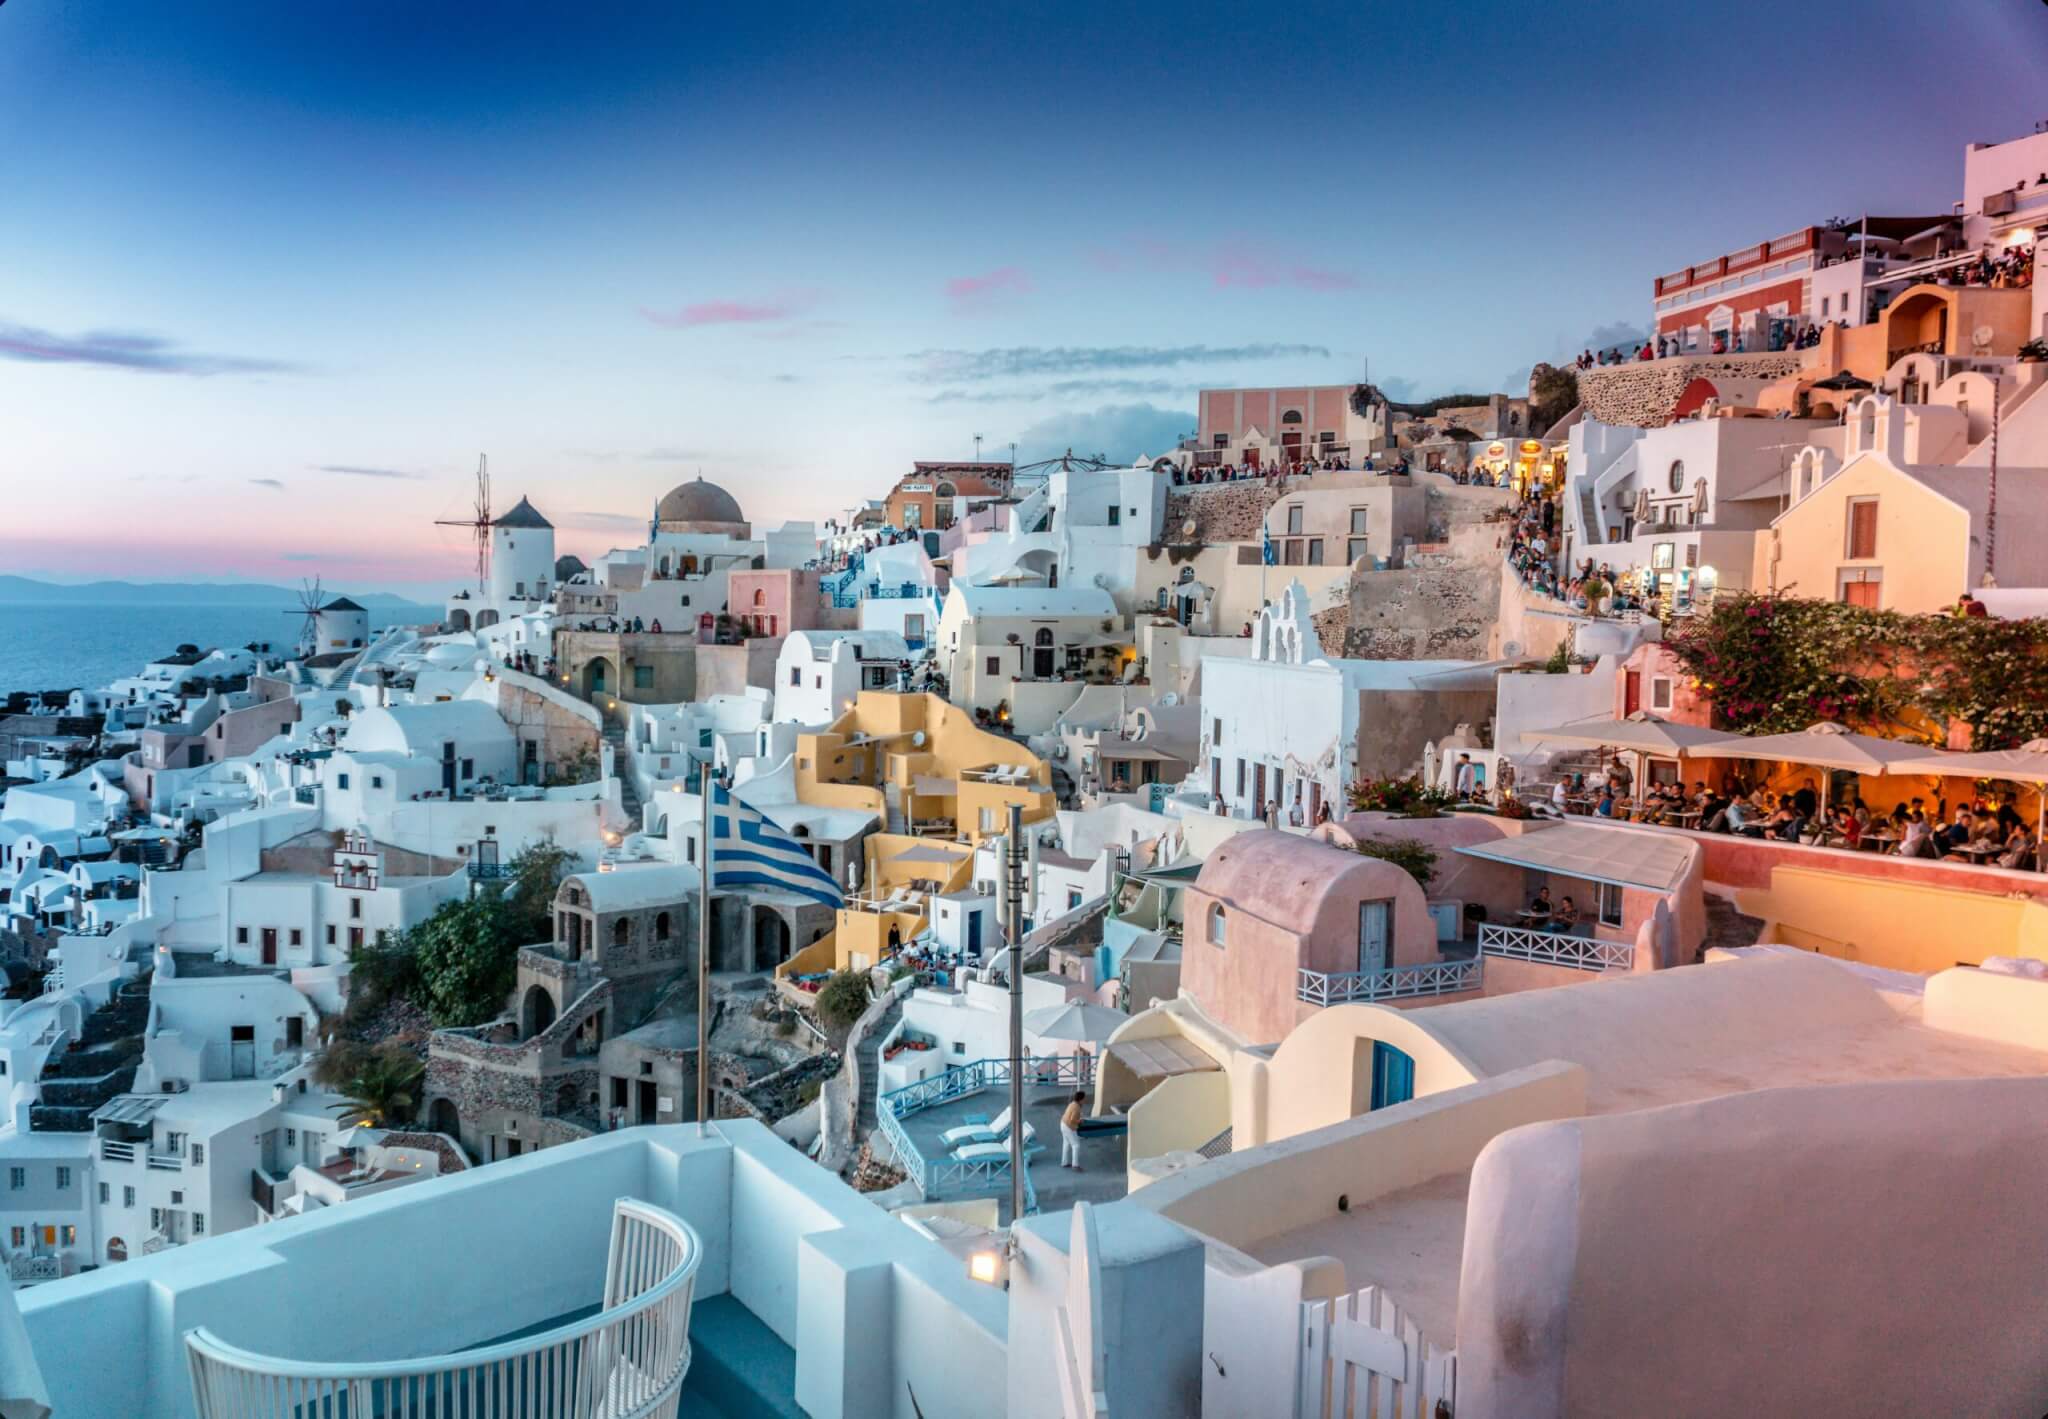 <p>As a college graduation trip, can you imagine a week or two in Greece? What a treasure. Those white-washed buildings and bright blue doors are something that can't be replicated anywhere else in the world. </p> <p>After four years of hard work, it would be such a treat to sit atop a rooftop terrace and sip on a crisp glass of white wine while dining on the fresh catch of the day. </p> <p><a href="https://www.macrotrends.net/global-metrics/countries/GRC/greece/crime-rate-statistics#:~:text=Greece%20crime%20rate%20%26%20statistics%20for,a%2020.76%25%20decline%20from%202018.">In terms of safety</a>, Santorini, Crete, Rhodes, Lesbos, and Cofu are all good options. The larger islands like Crete and Corfu might have a little bit more to be concerned about, as they have larger populations. But, there are far fewer worries there than the major metropolises like Athens or Thessaloniki. </p> <p>Some of the finest accommodations in Santorini include:</p> <ul>   <li>Andronis Luxury Suites</li>   <li>Santorini Kastelli Resort</li>   <li>Aenaon Villas </li>   <li>Oia Mare Villas</li>   <li>Aris Caves</li>   <li>Nikki Beach Resort & Spa</li>   <li>Kokkinos Villas</li>   <li>La Mer Deluxe Hotel & Spa</li>  </ul> <p>Each of these high-class destinations carries undercurrents of relaxation, safety, and wholesale bliss, making them some of the best college graduation trip ideas. But don't limit these resorts to college grads alone. You can also turn any of these resorts and spas into one of the <a href="https://travelreveal.com/destination-guides/best-mother-daughter-vacations/">best mother-daughter vacations</a>. </p>